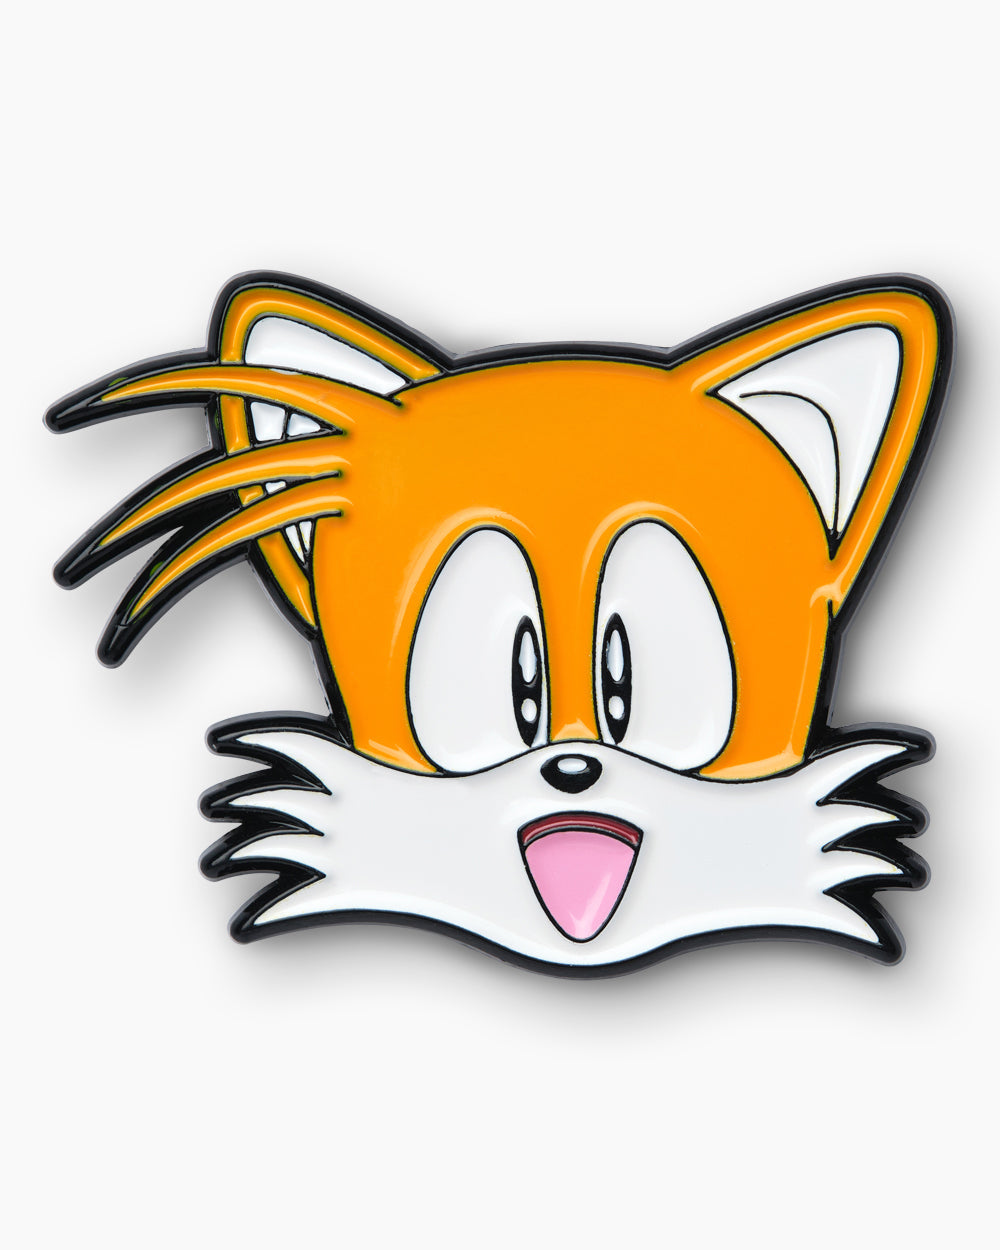 Tails Face Enamel Pin | Threadheads Exclusive